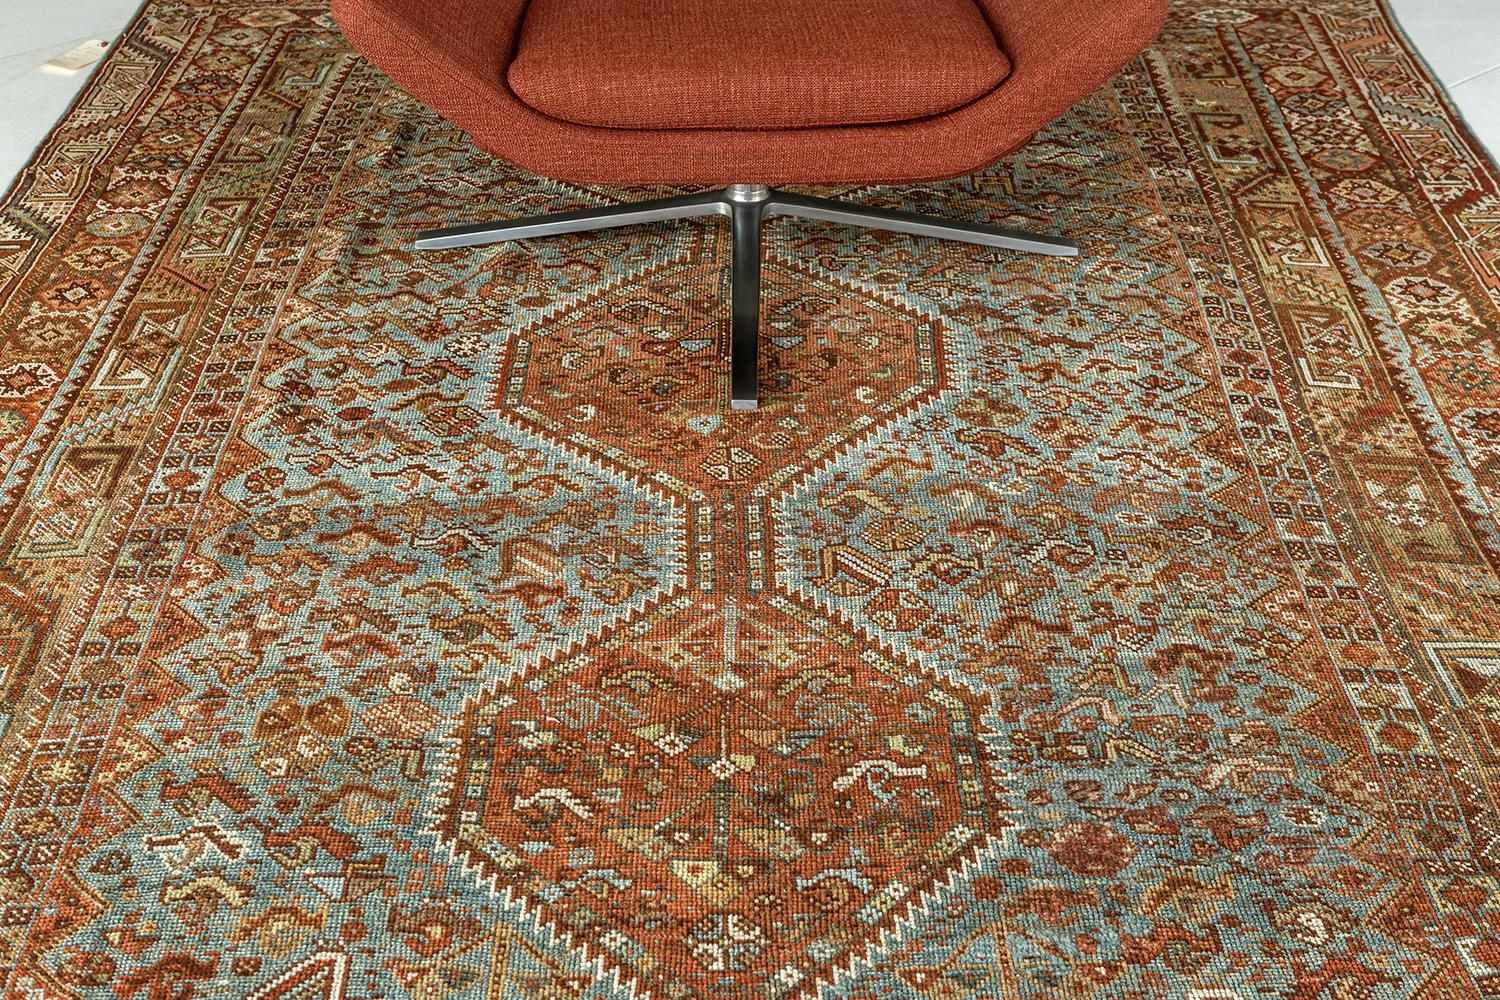 This sophisticated Antique Persian Shiraz rug from Persia features a beautiful natural wool pile. It is adorned with cinnamon, saffron, and earthy tone colors that ensembles motifs, florid elements, and symbols. Series of three central medallions,